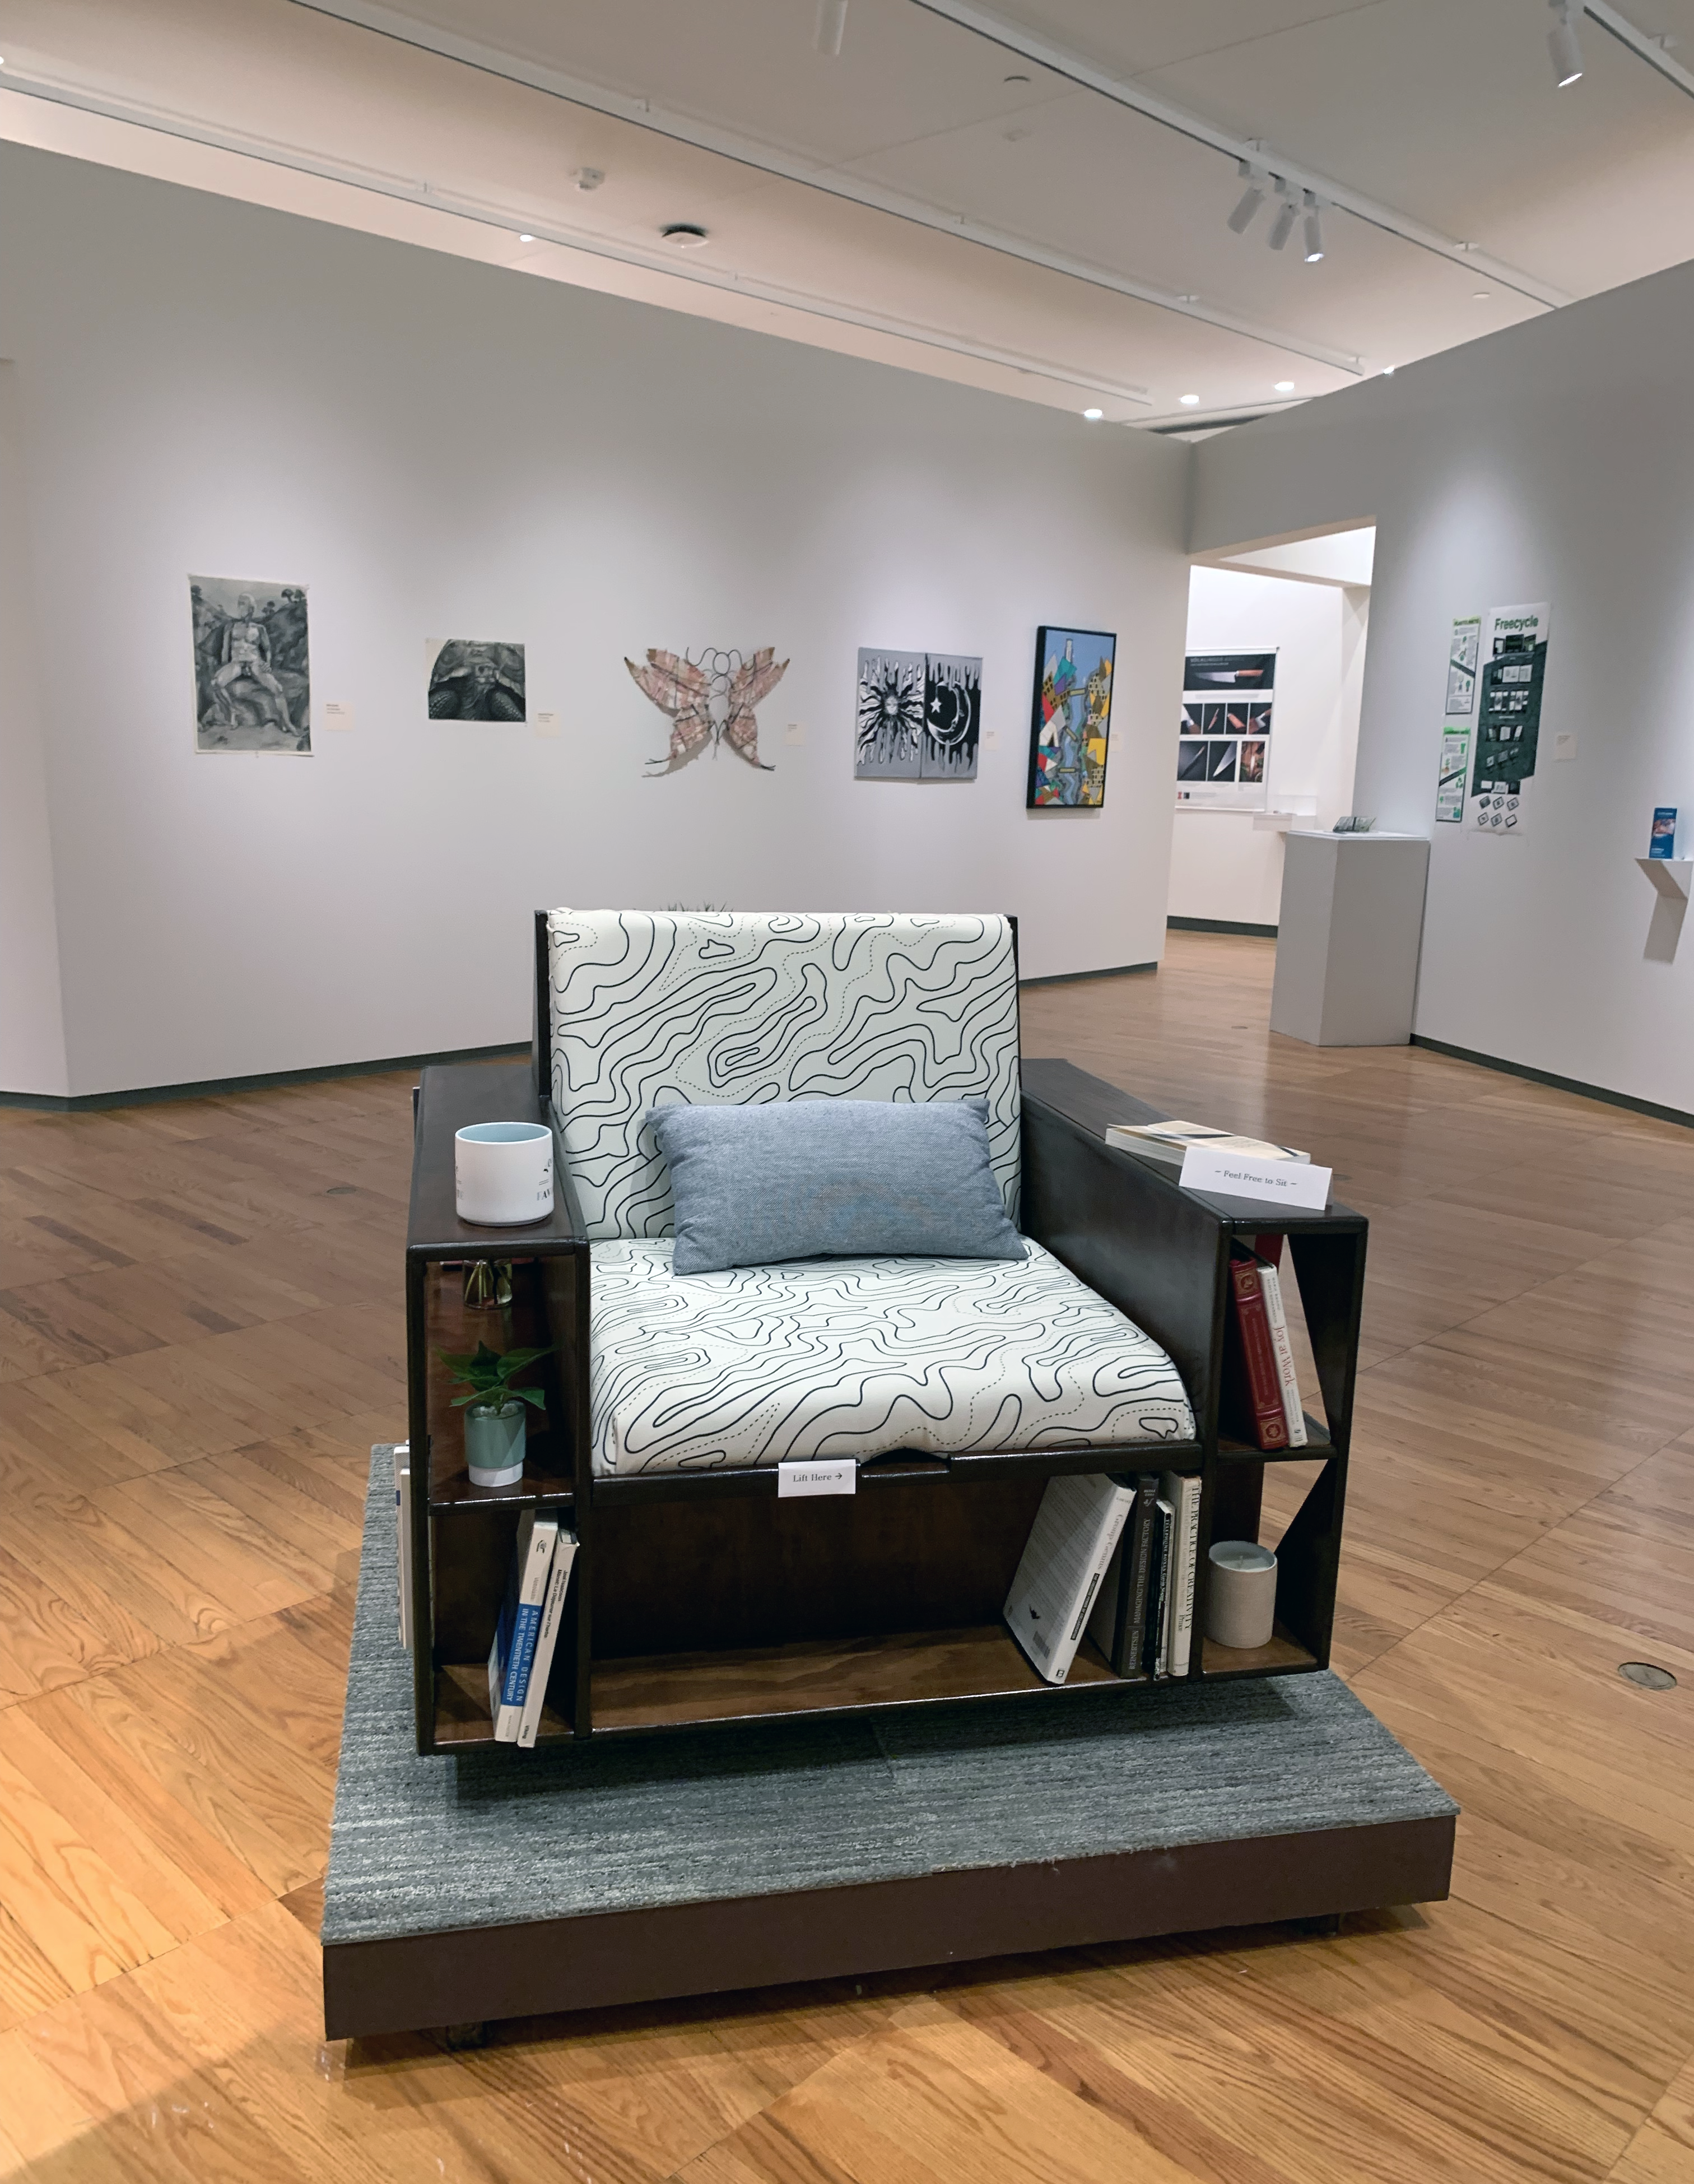 Chair built with arms that hold shelves in the foreground with other paintings, sculptures, and drawings on the back wall.